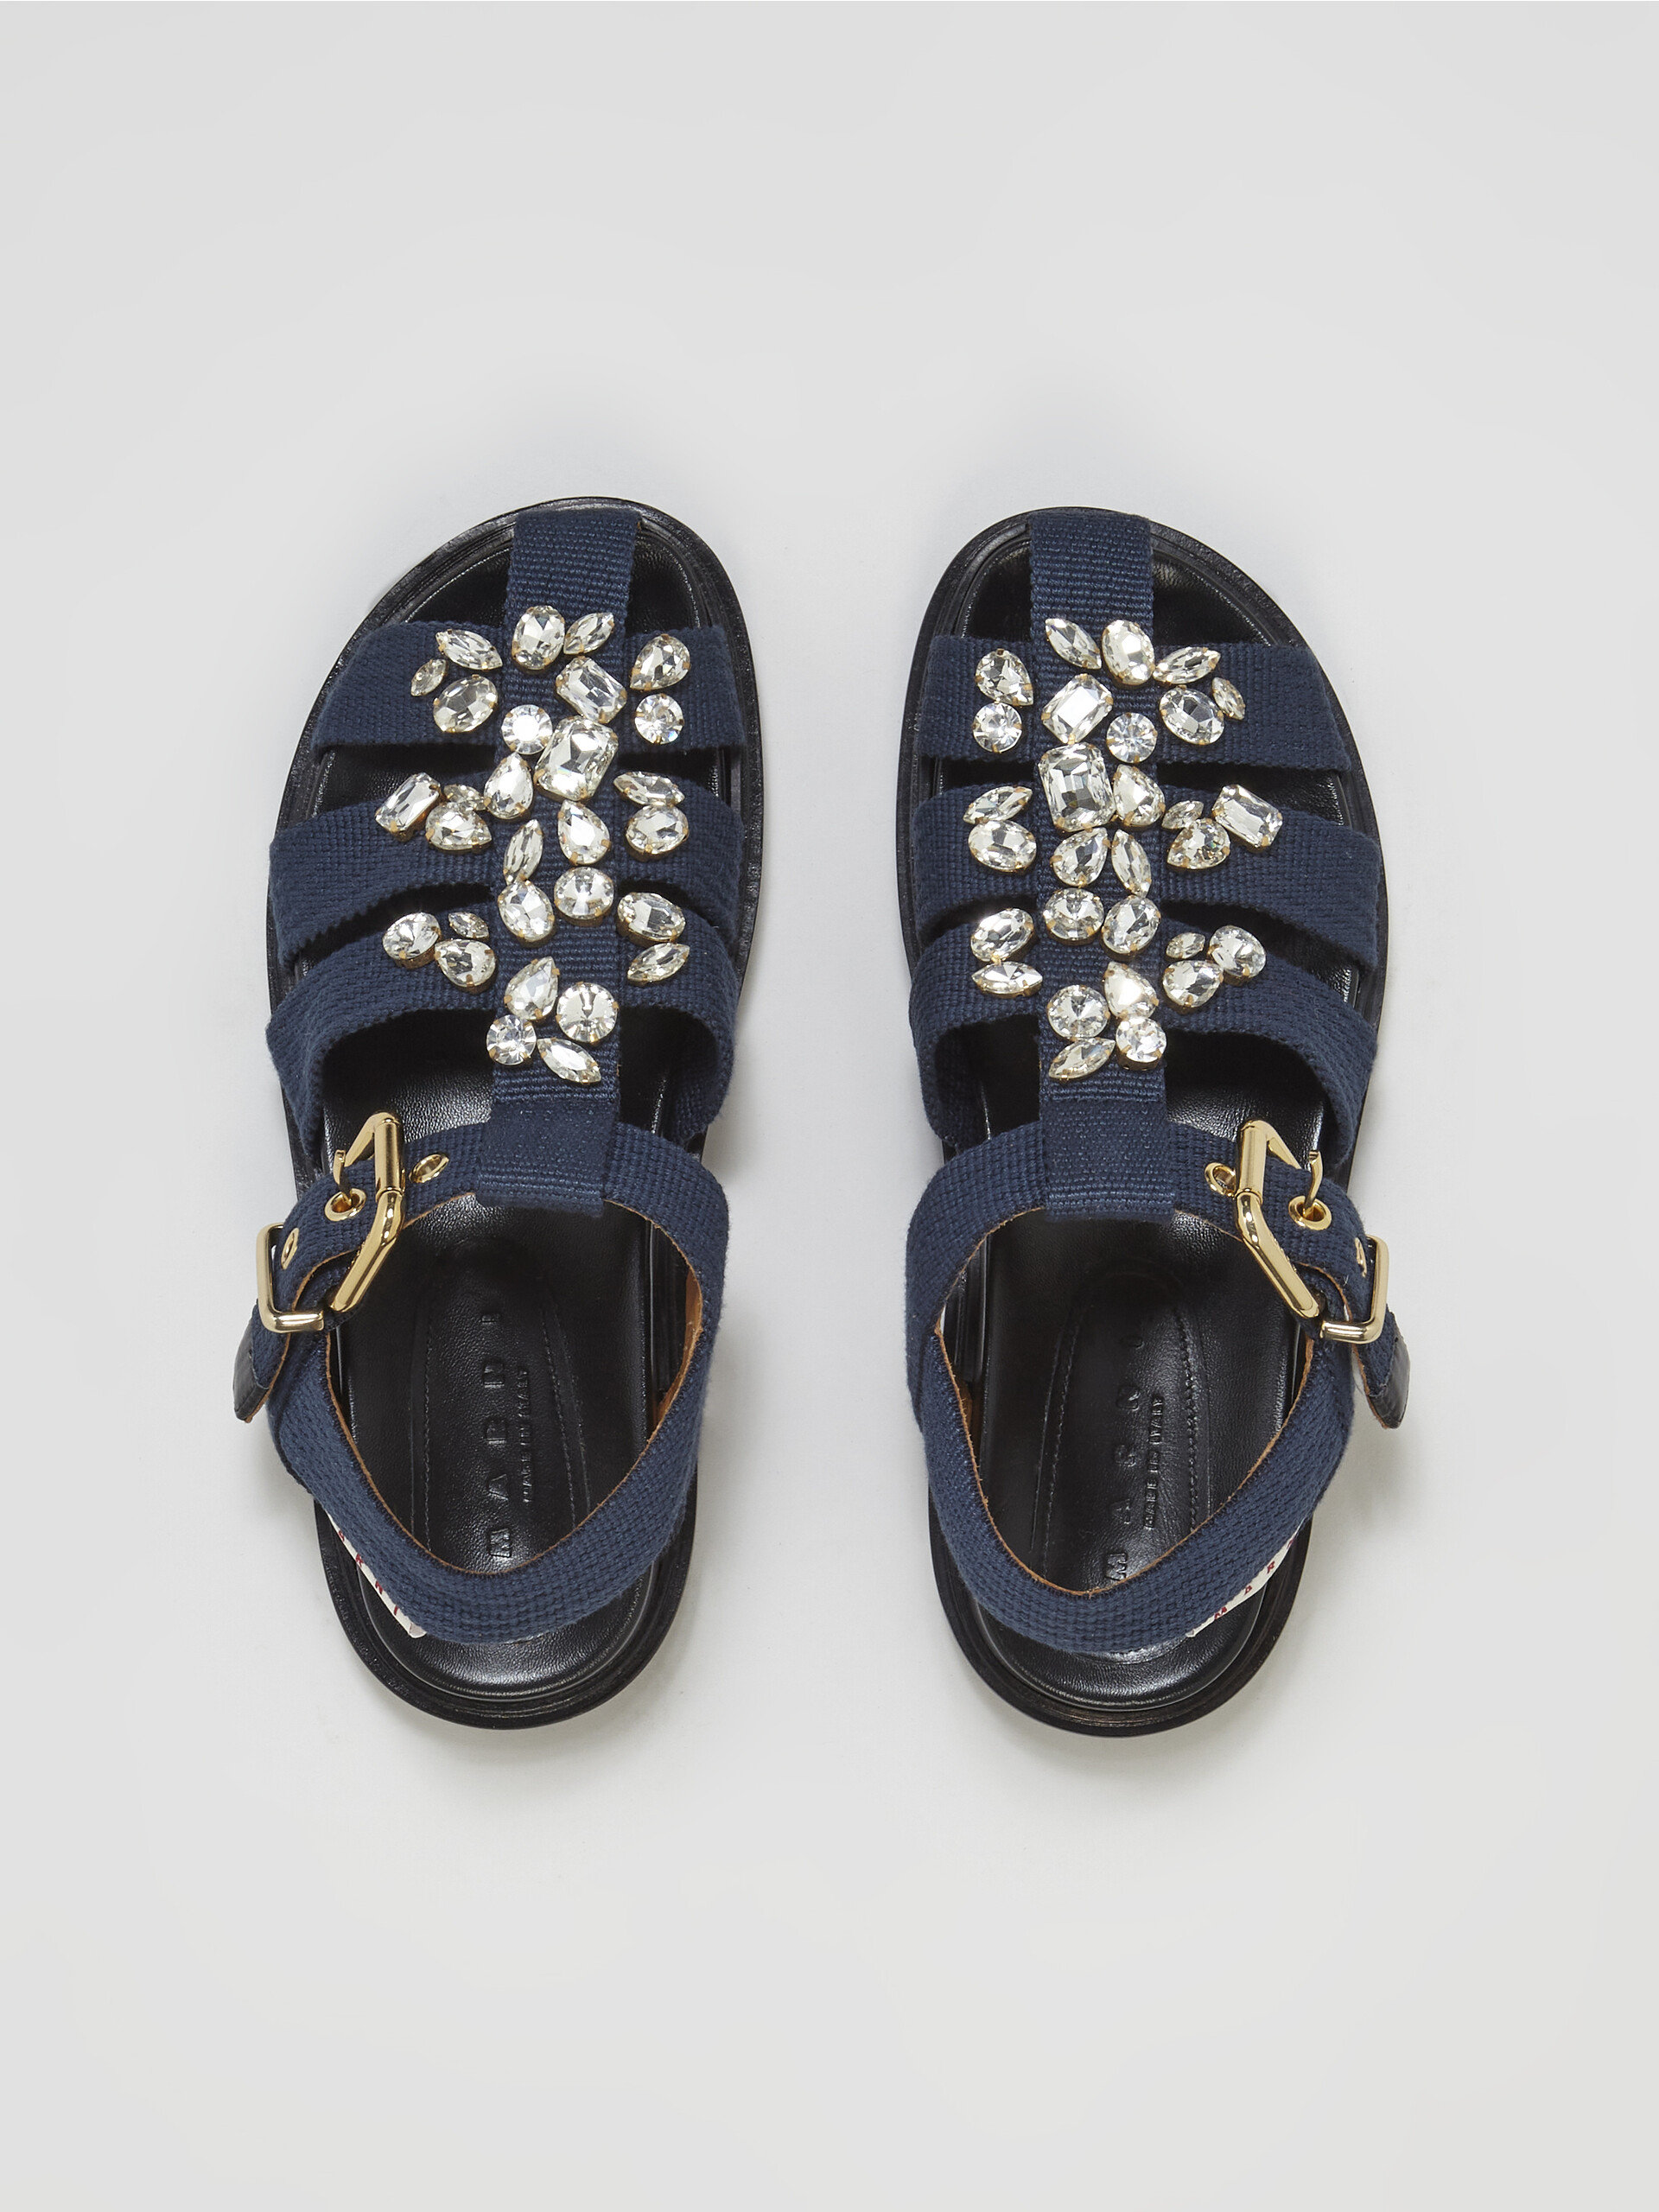 Blue ribbon Fussbett sandal with glass beads - Sandals - Image 4